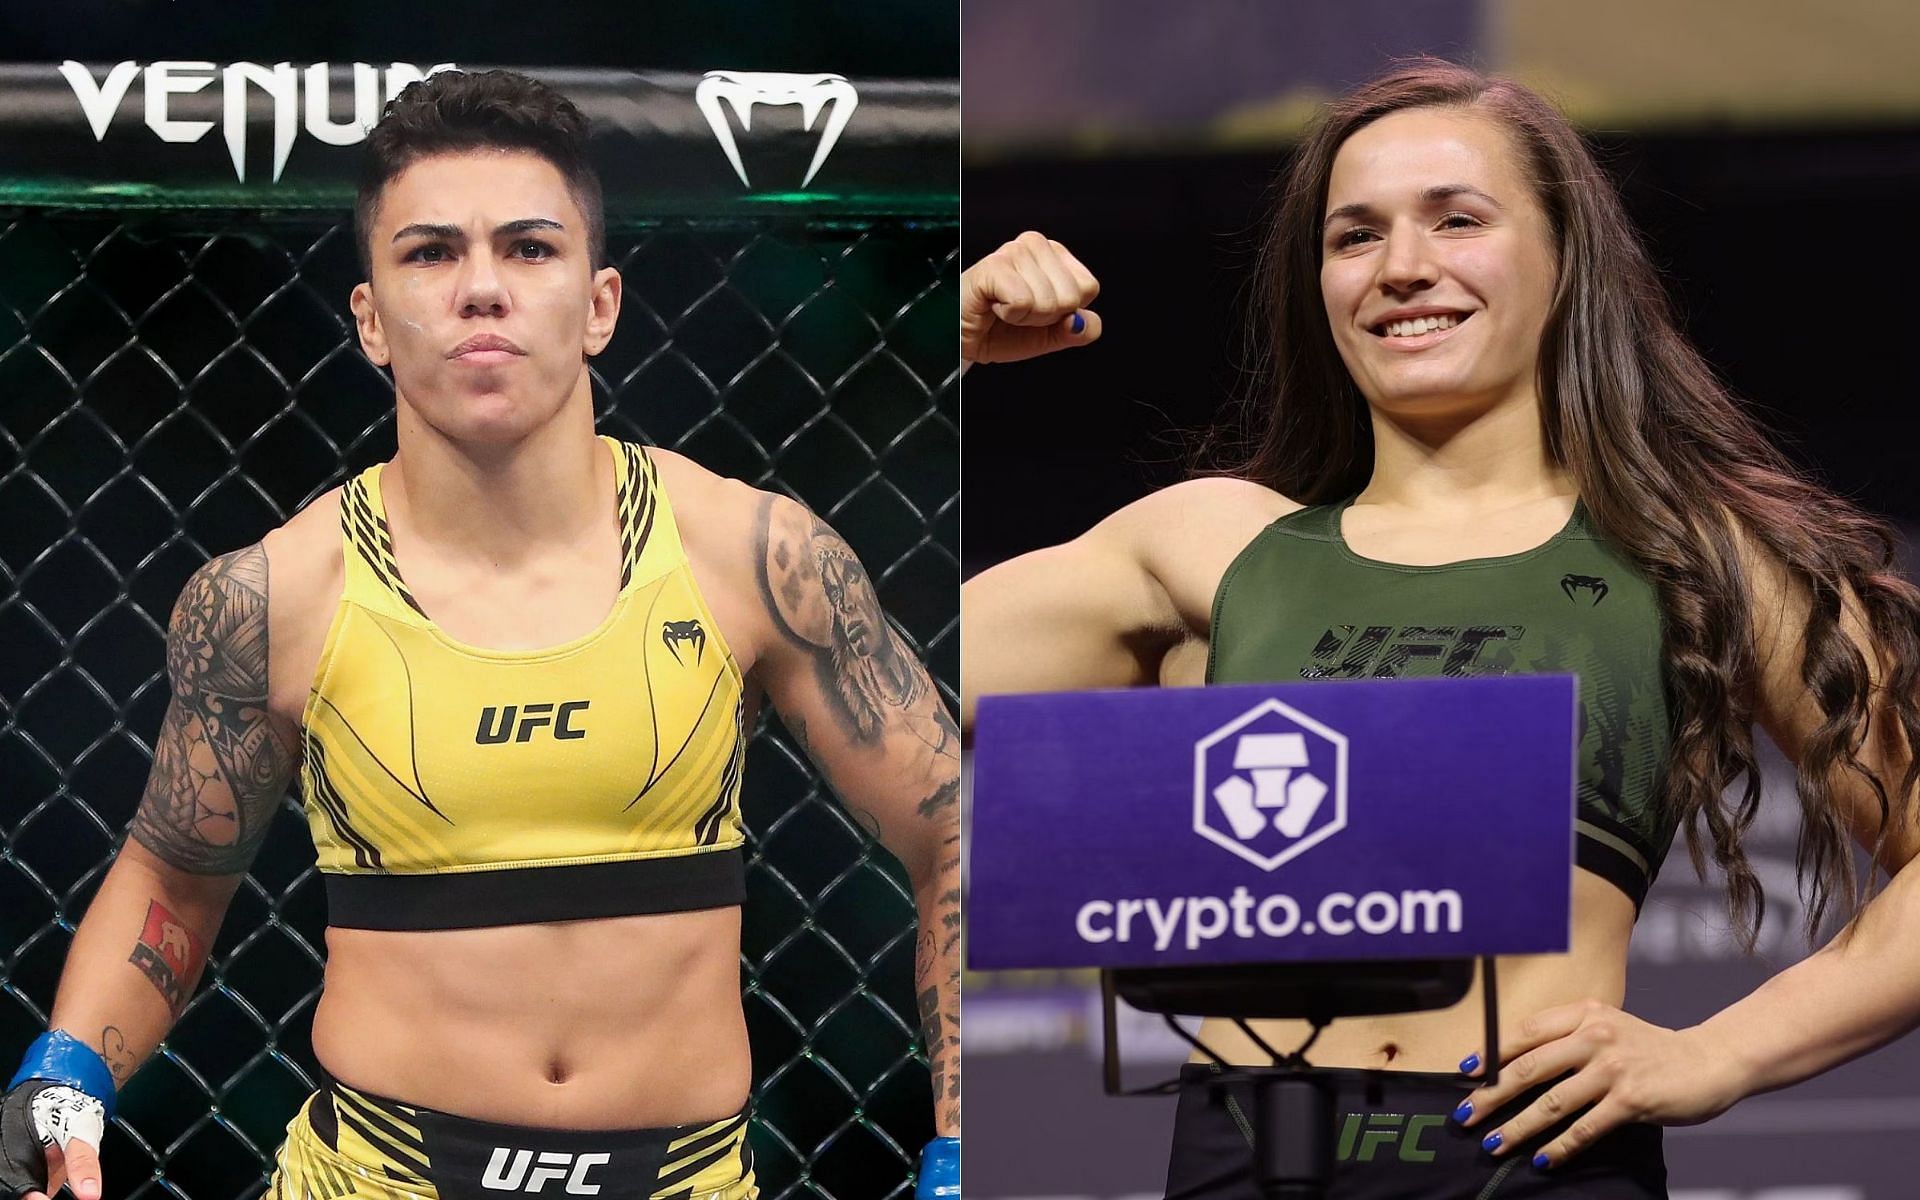 UFC Fight Night 219 Odds: Jessica Andrade vs Erin Blanchfield- How to Officially Place Your Bets for UFC Vegas 69? Picks and Prediction